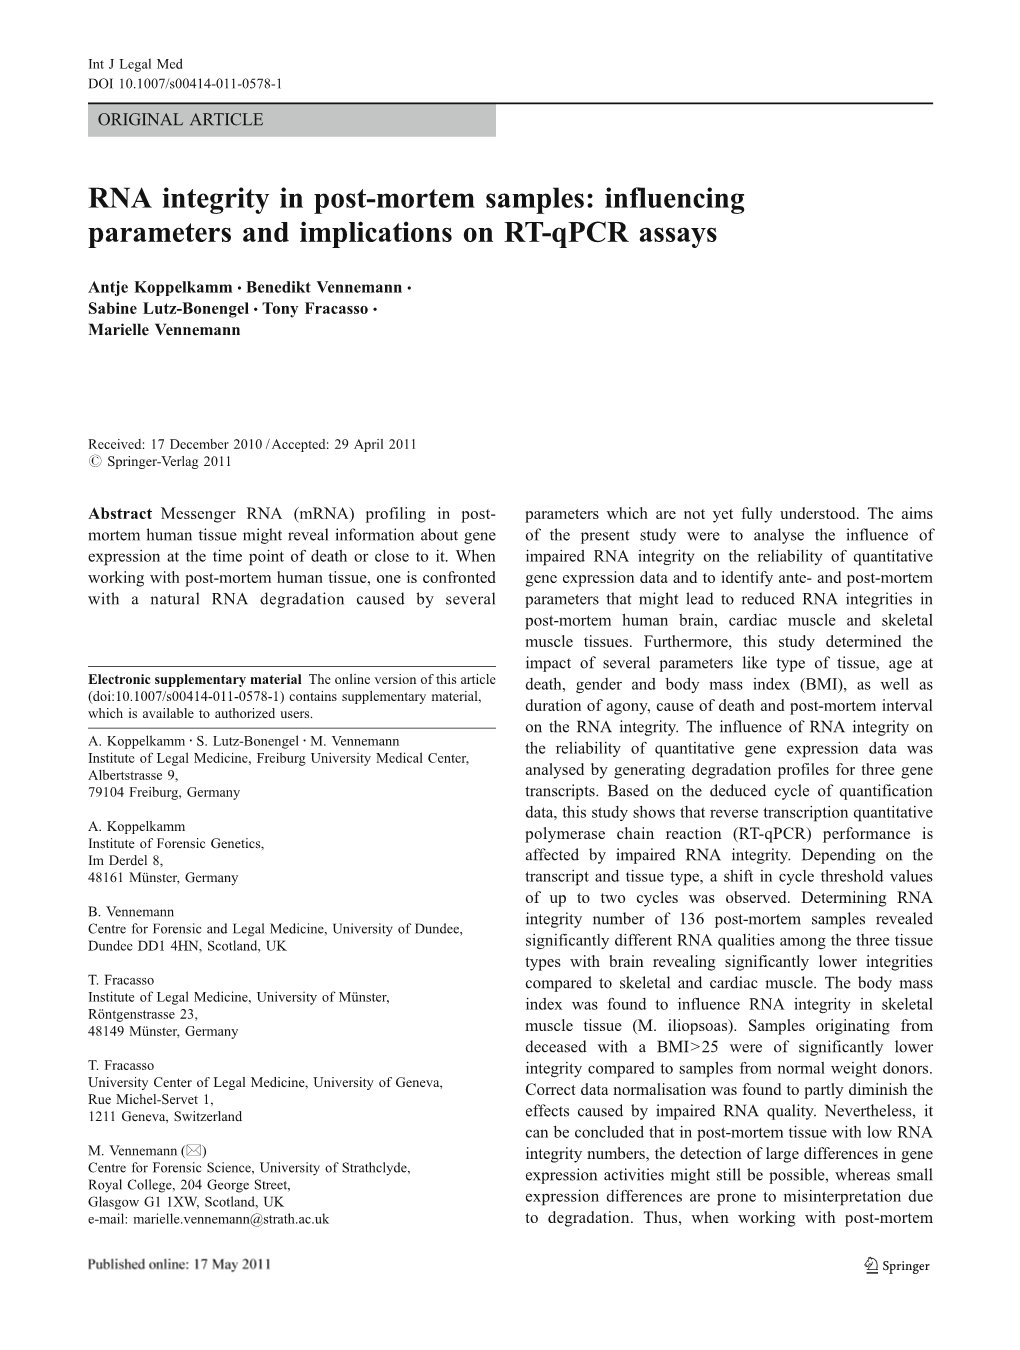 RNA Integrity in Post-Mortem Samples: Influencing Parameters and Implications on RT-Qpcr Assays